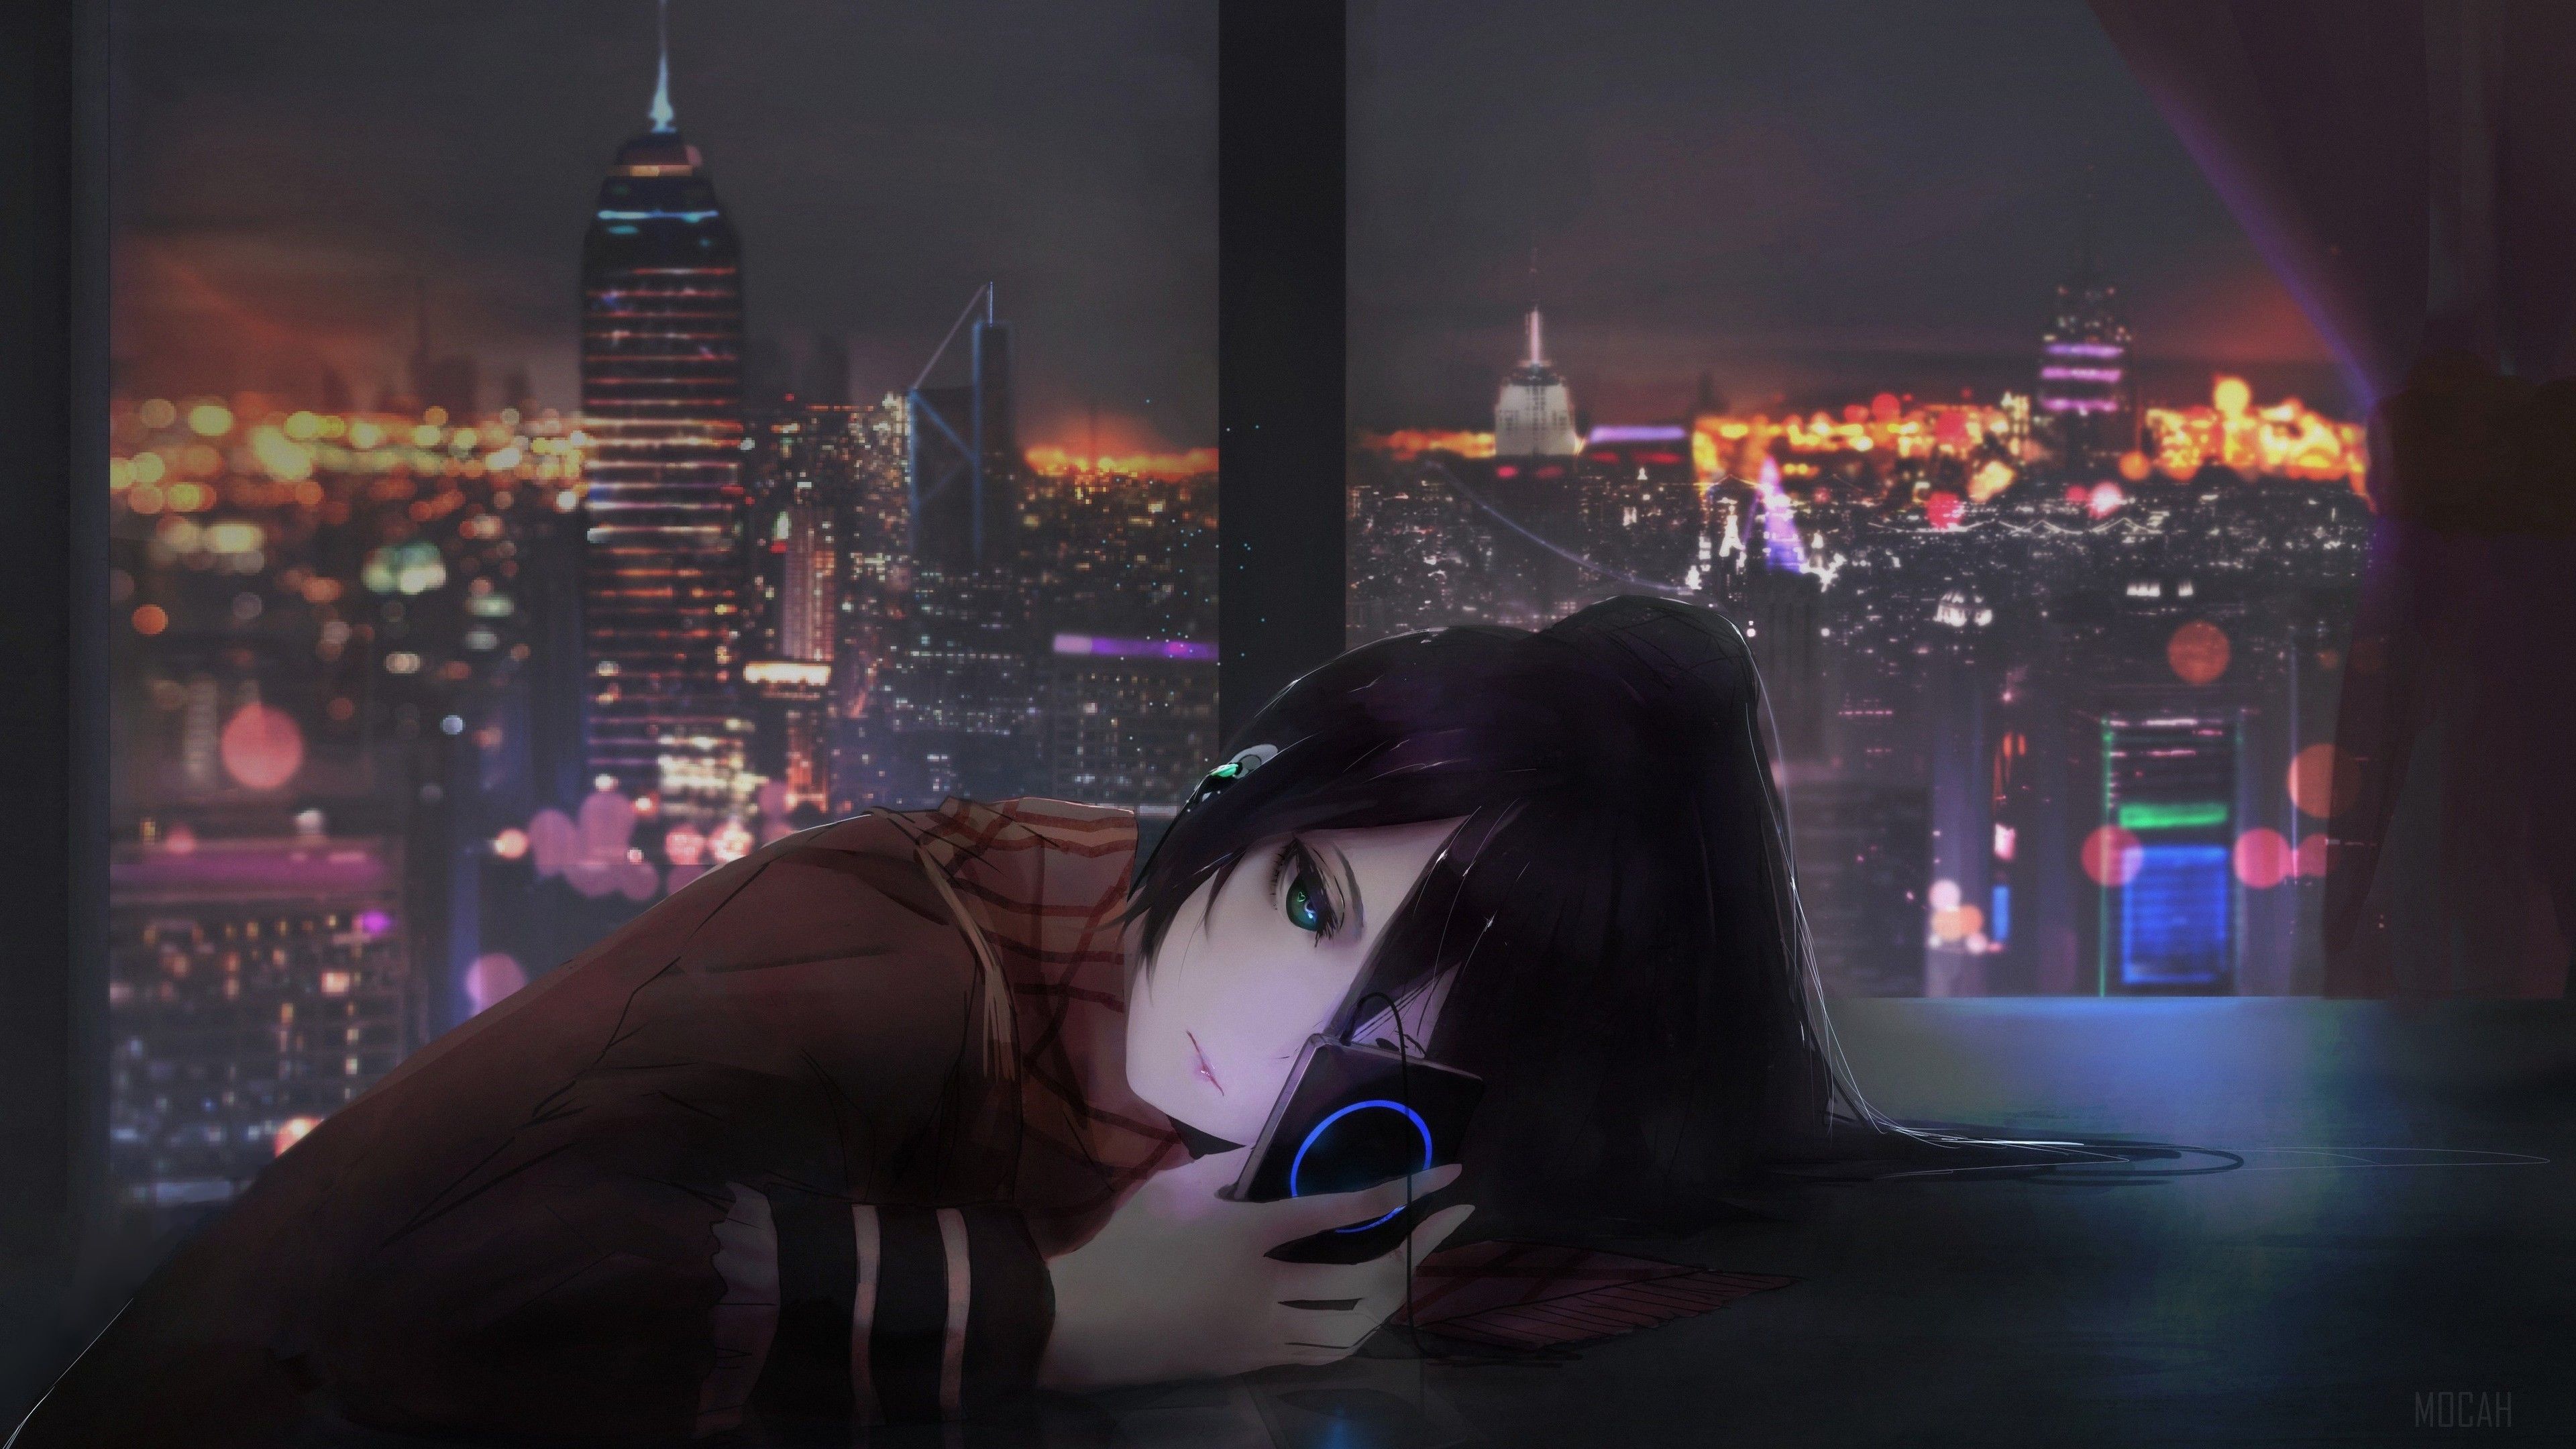 1920x1080 anime ghost in the shell cyberpunk cityscape night phone wallpaper background desktop wallpaper background - Music